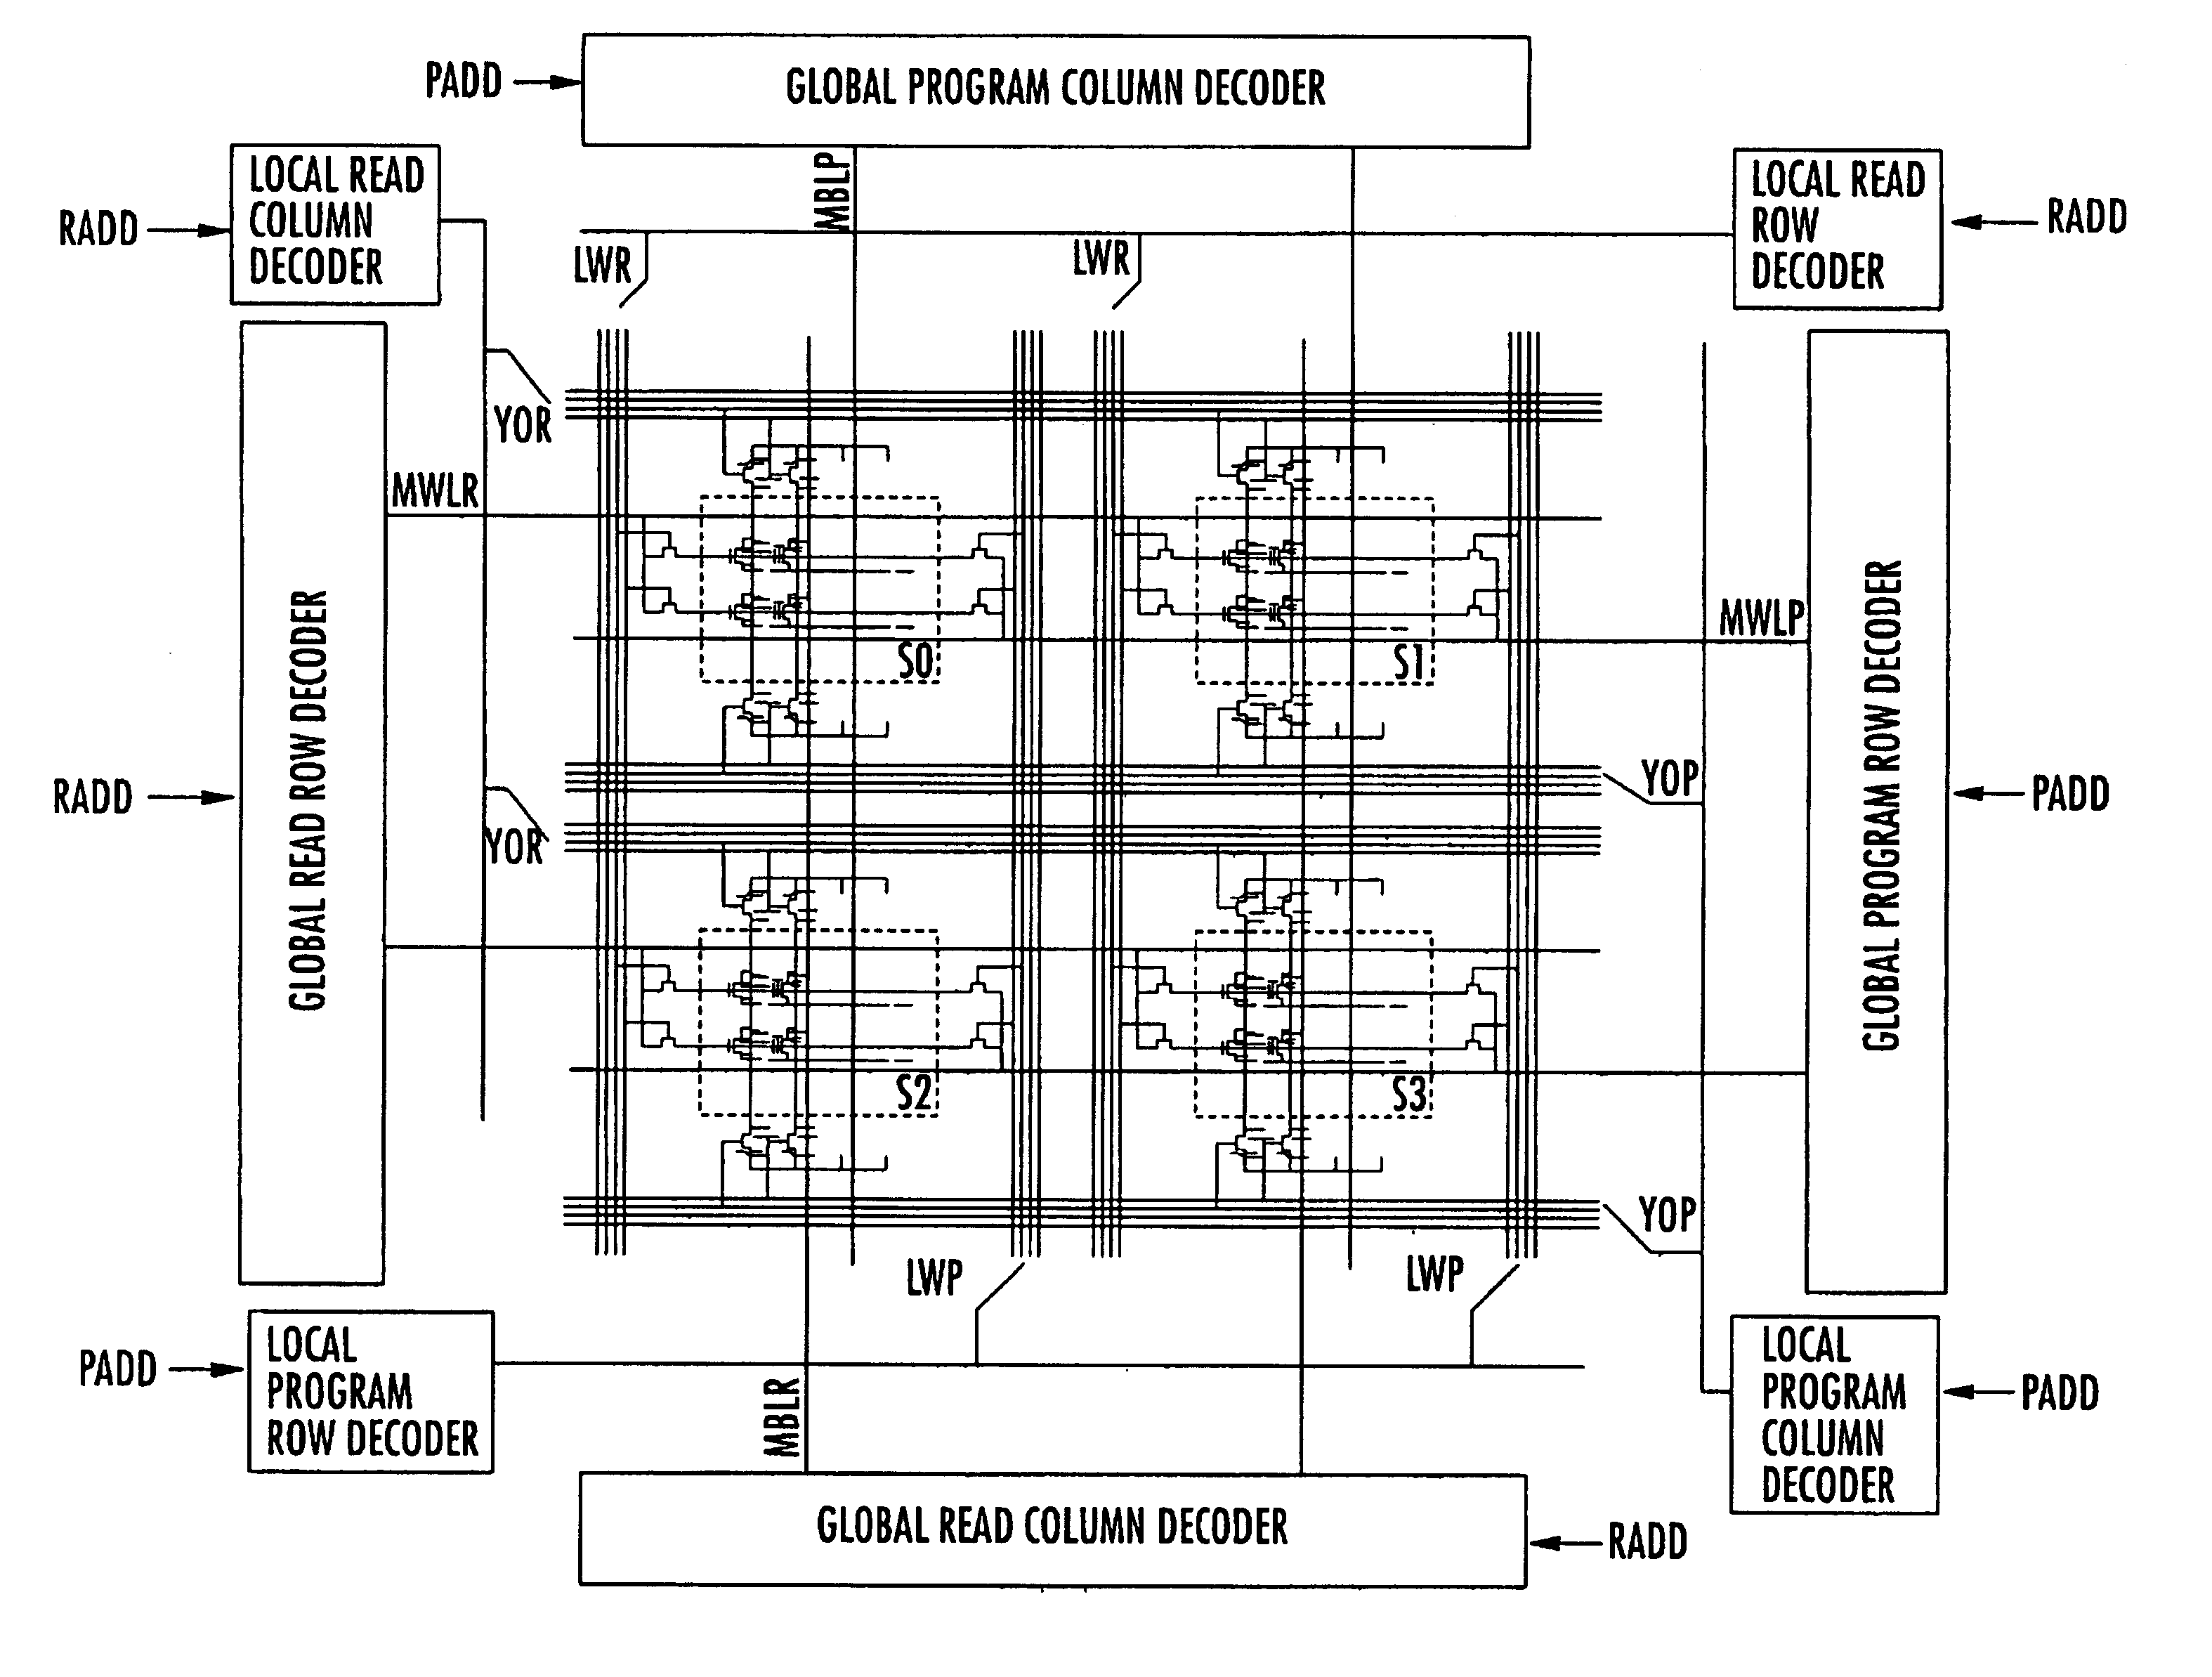 Architecture for a flash-EEPROM simultaneously readable in other sectors while erasing and/or programming one or more sectors